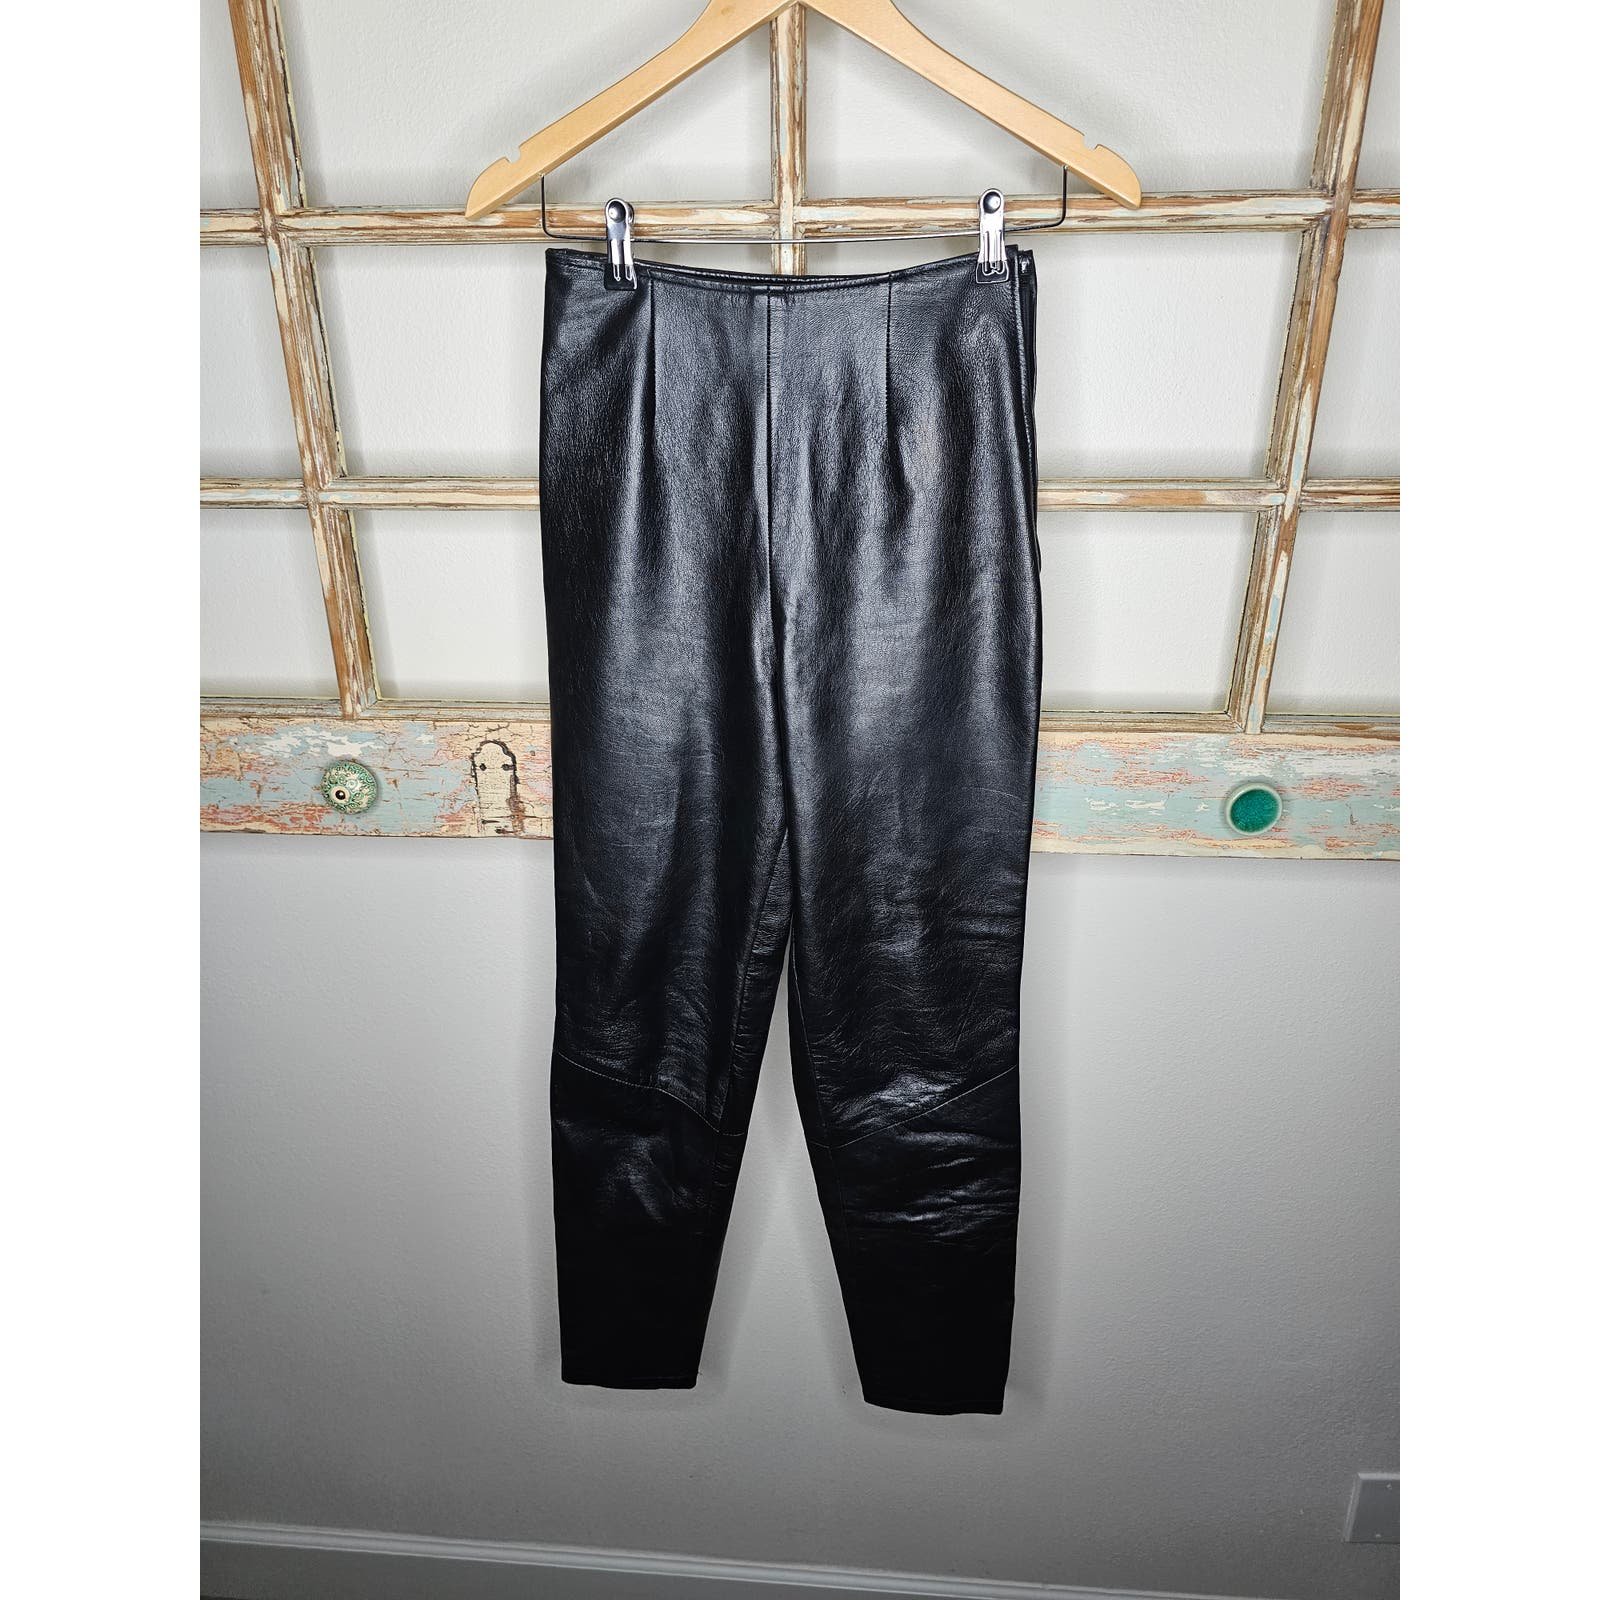 Wholesale price Leather Carina Pelle lined Black Pants Ladies size 4 HYw6980V2 New Style